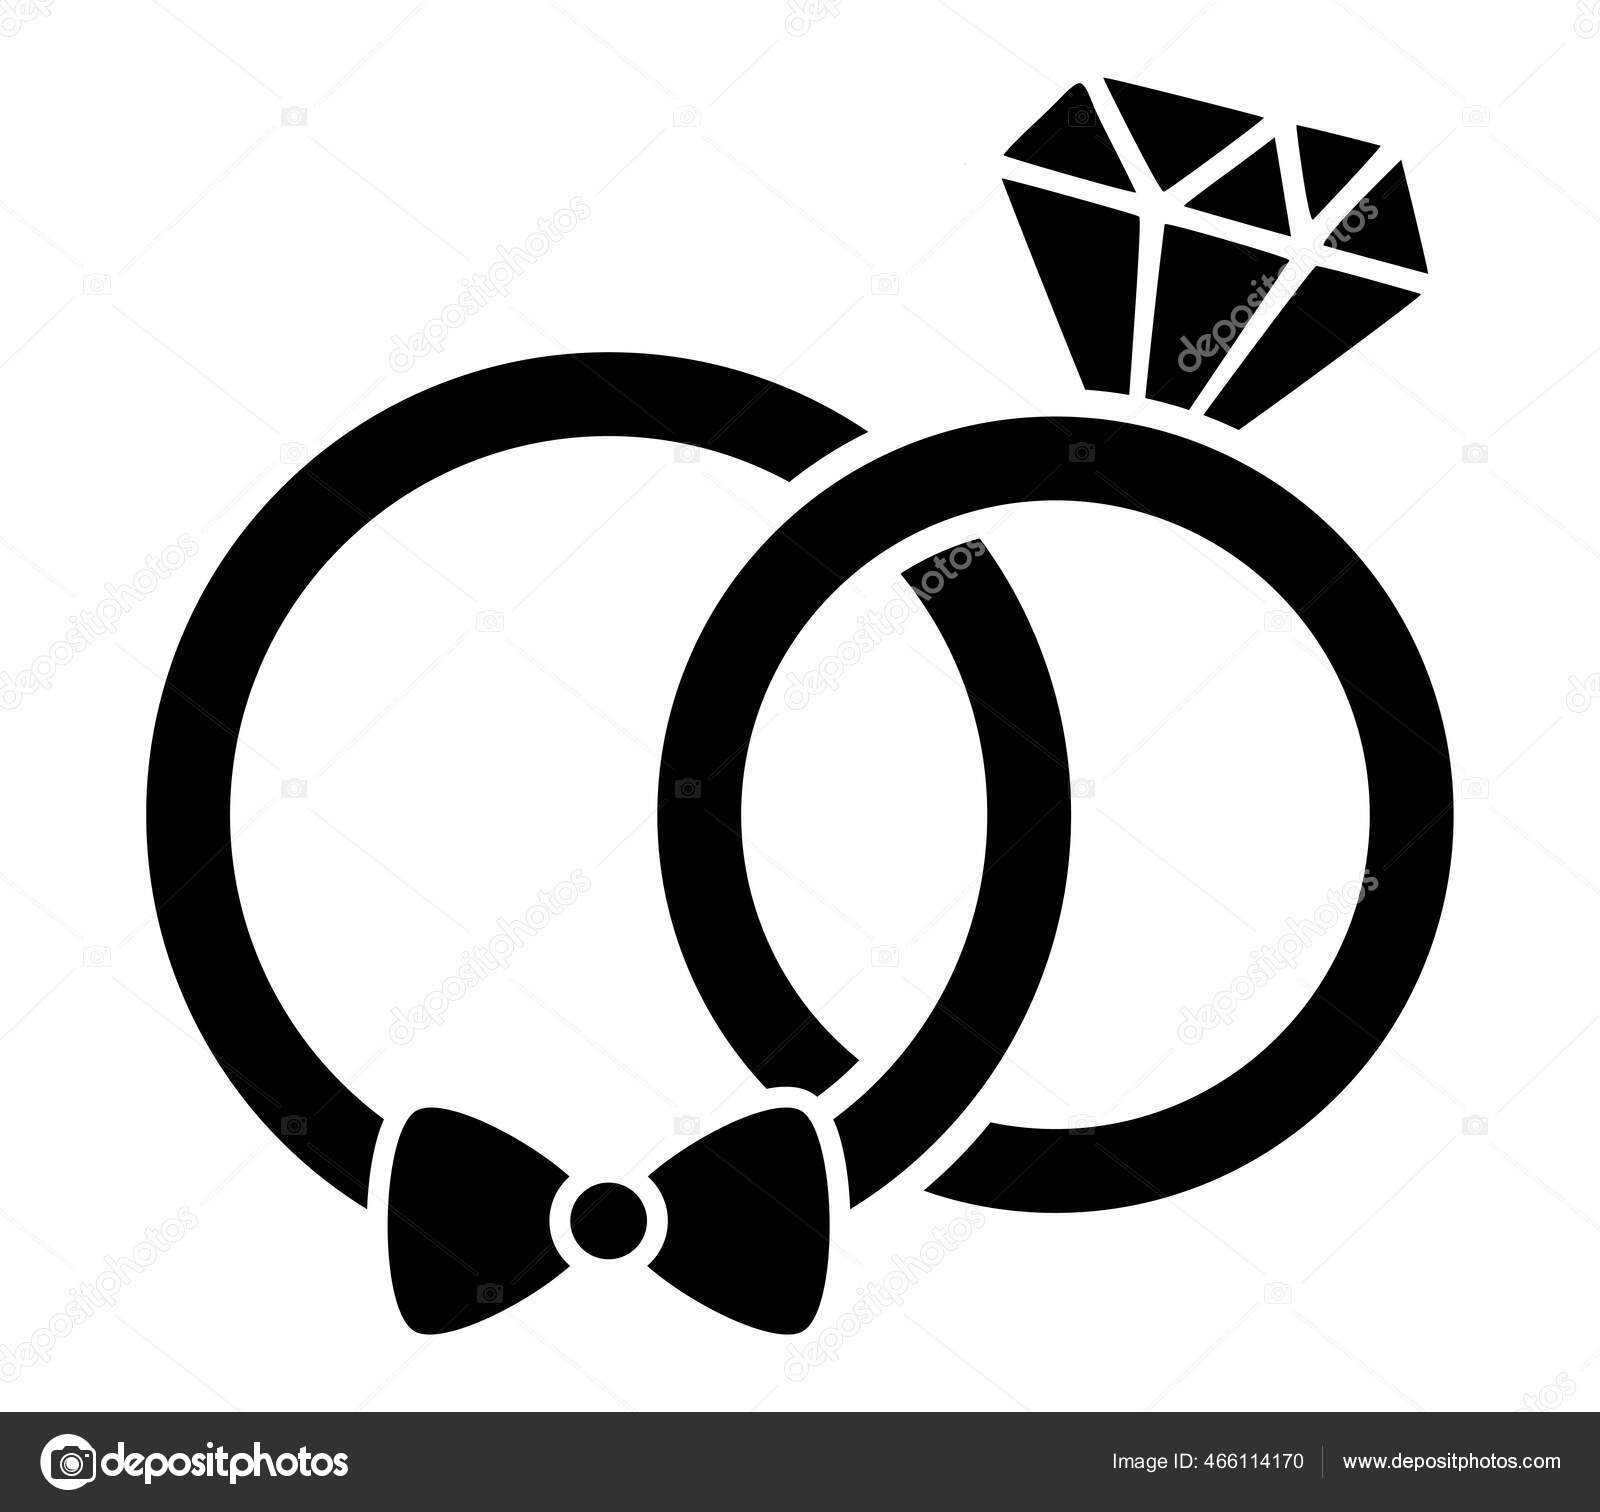 Elden Ring Logo and symbol, meaning, history, PNG, brand